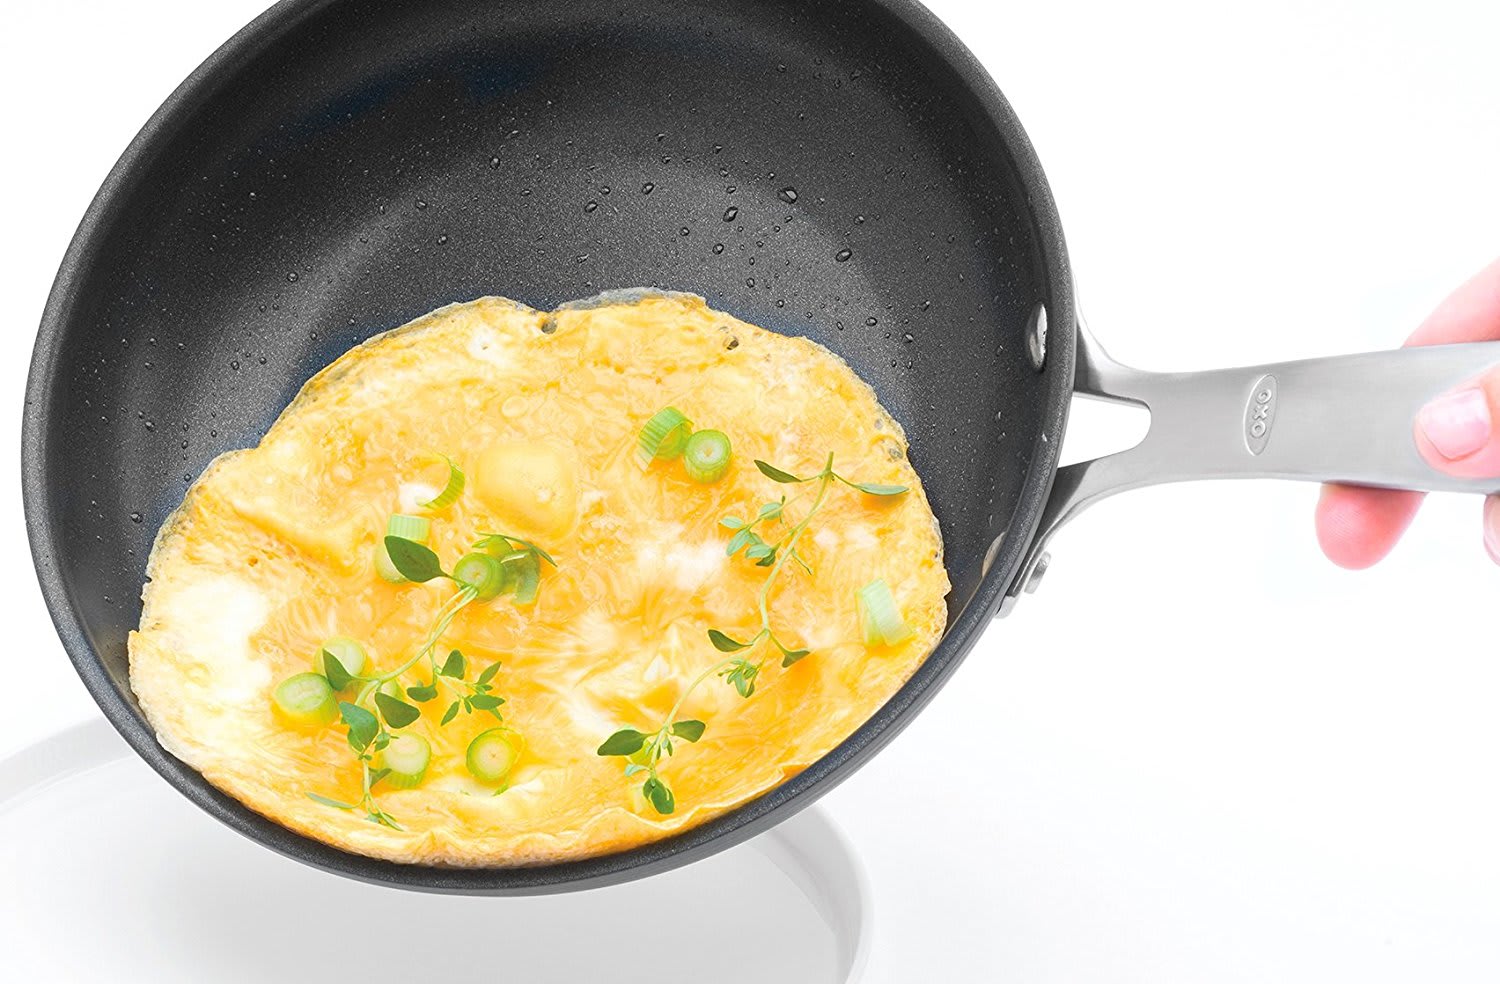 Are nonstick pans safe? - Reviewed